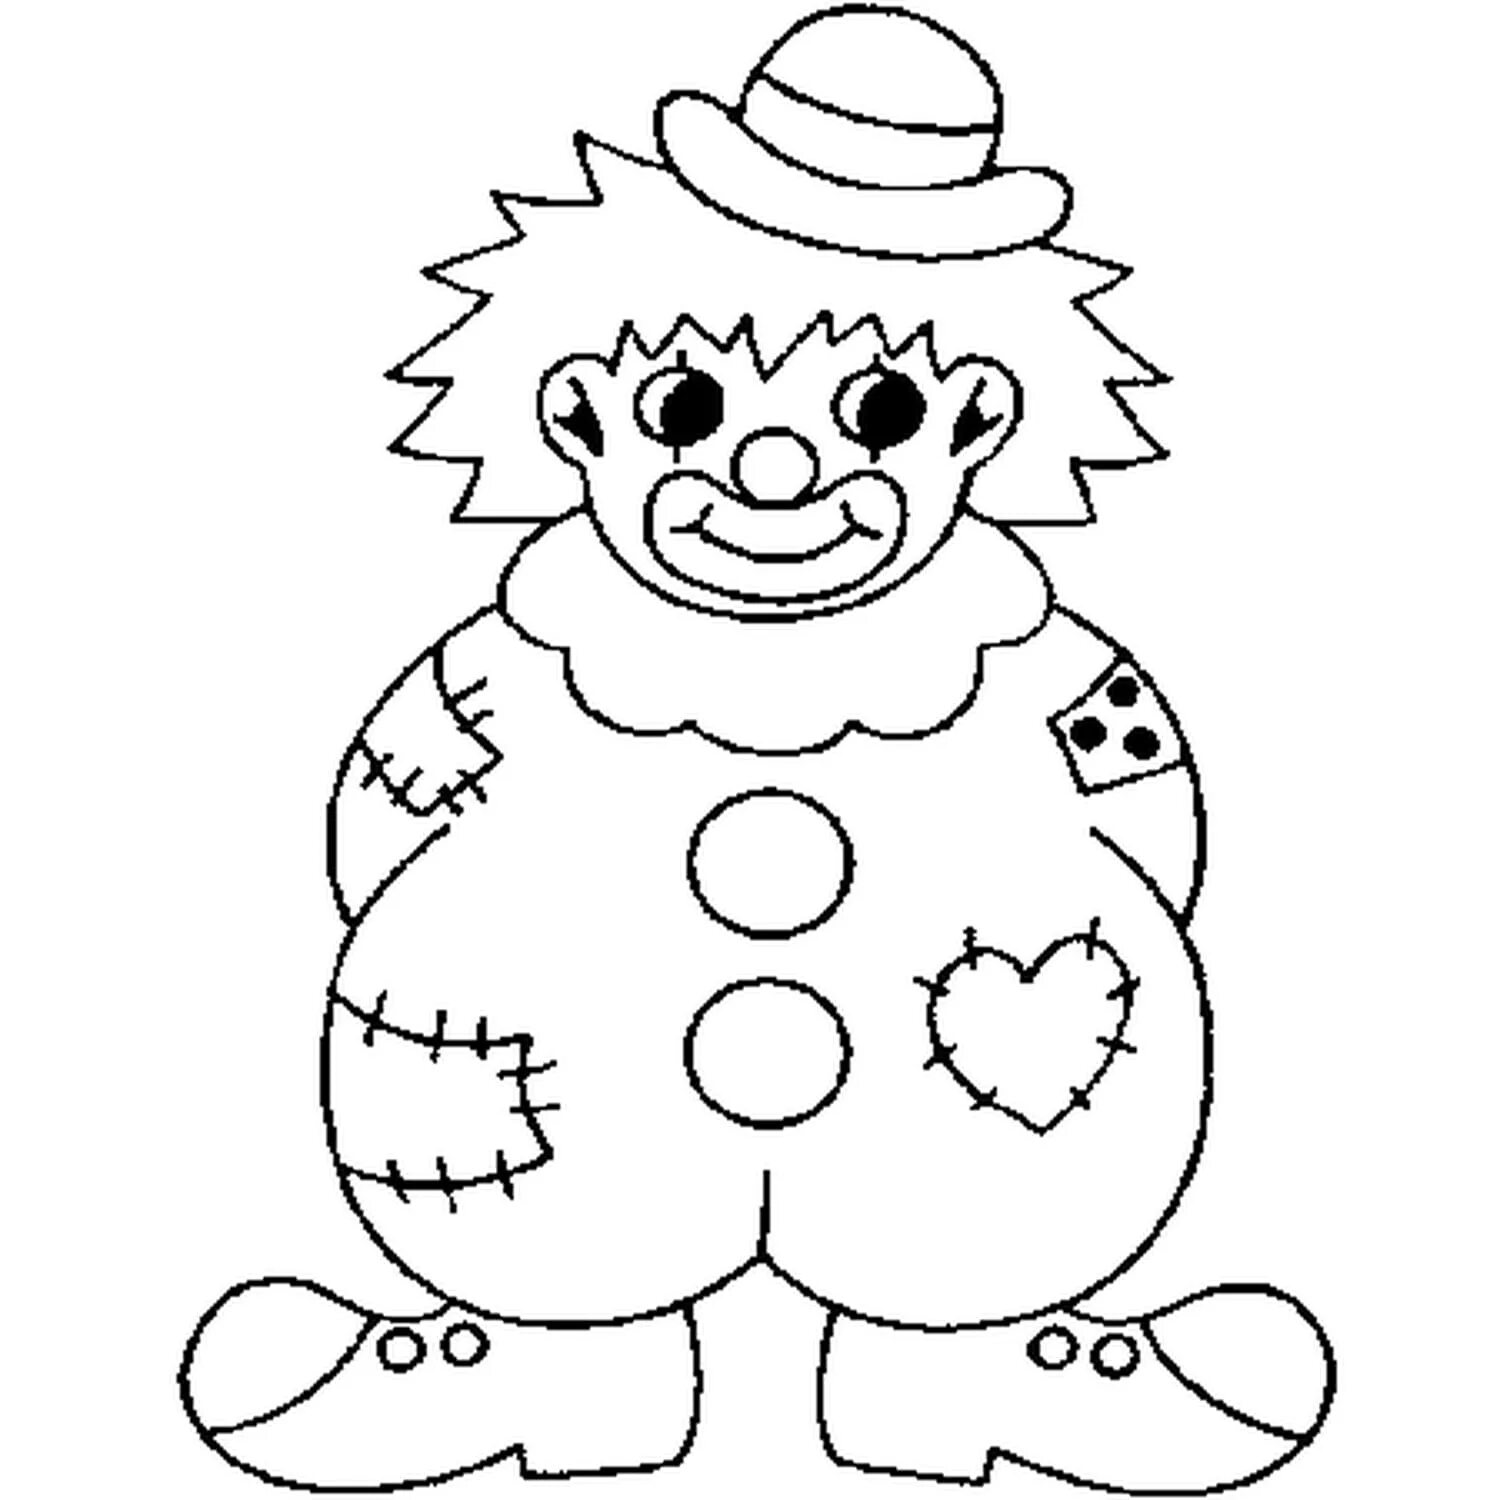 Exciting clown drawing for kids